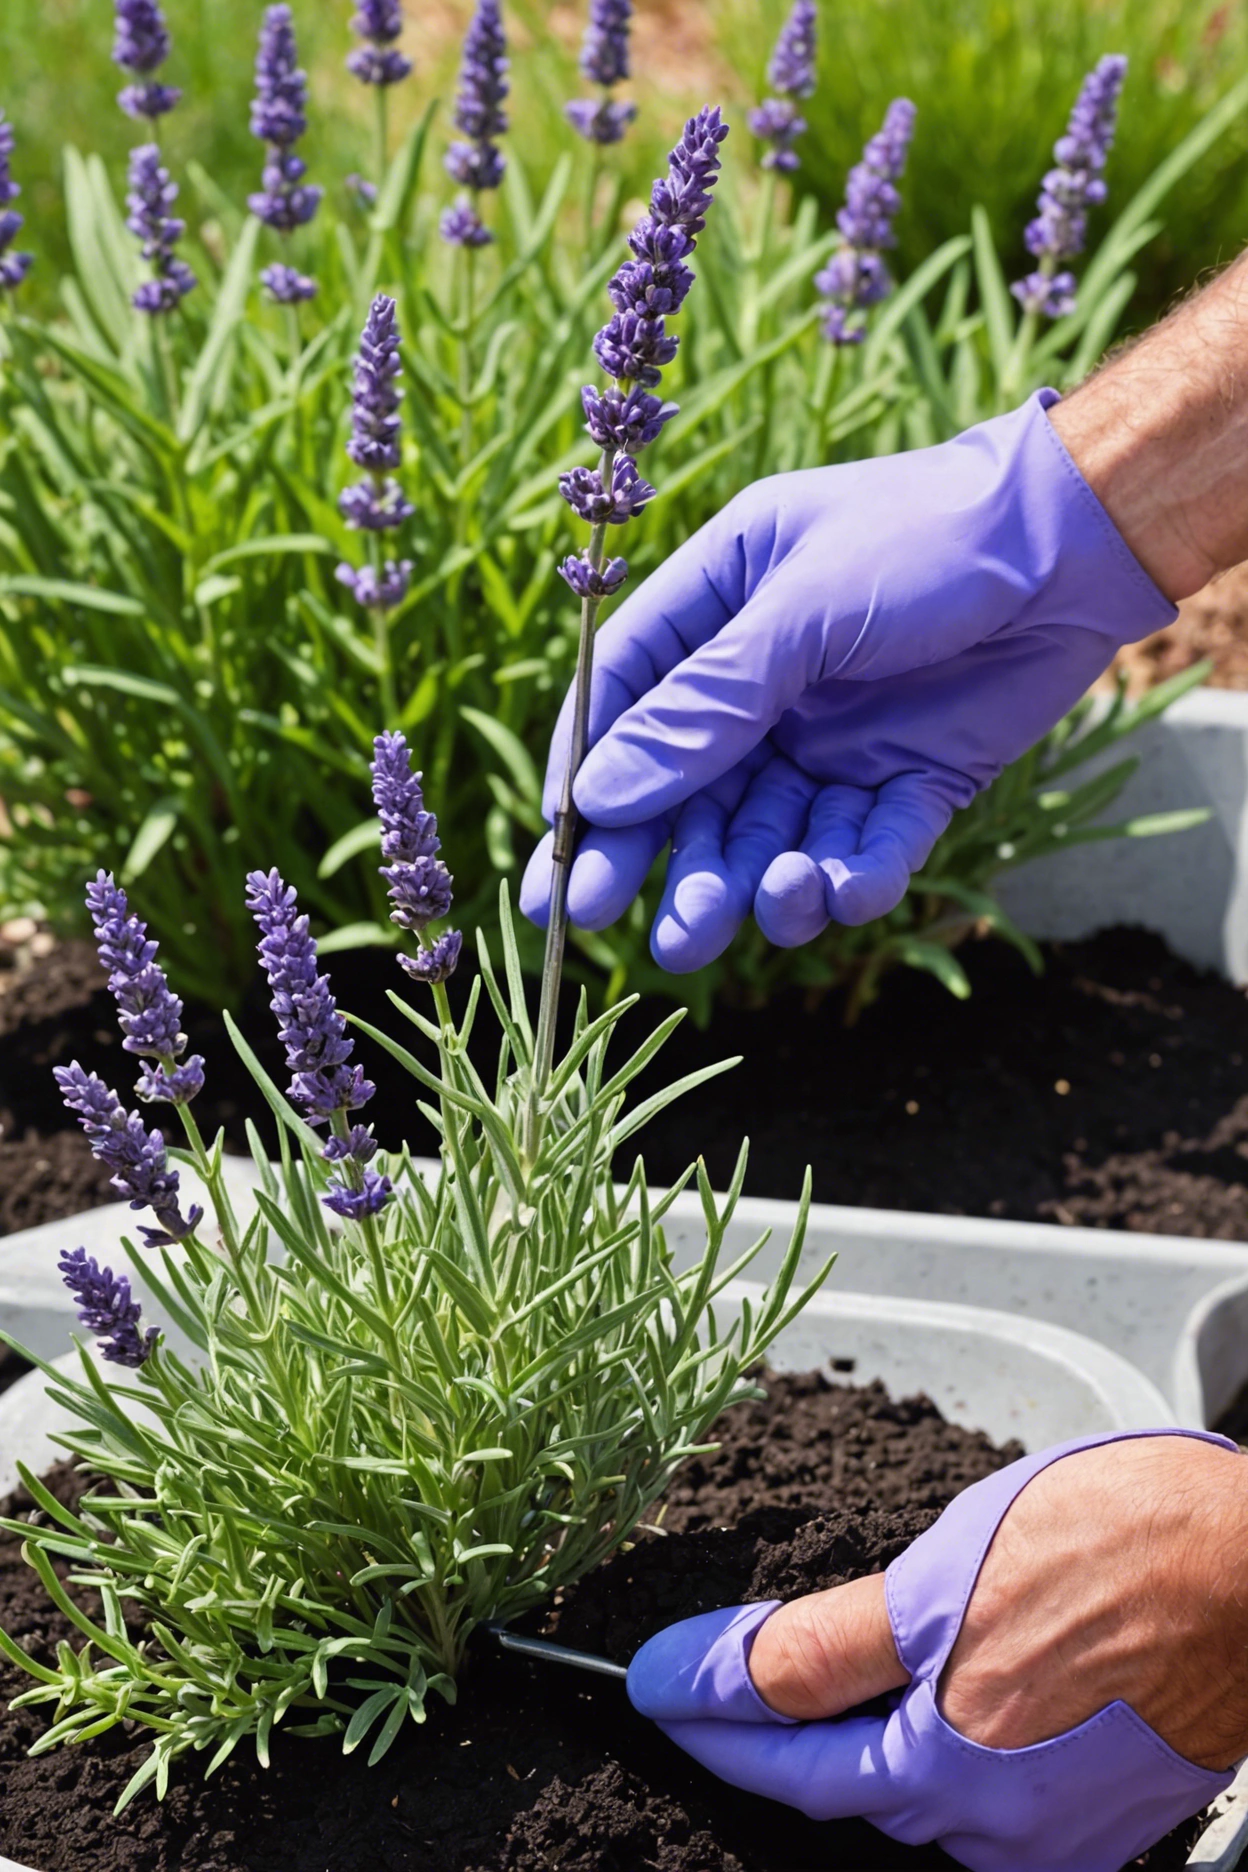 "Gardener's hand adjusting a stake next to a sideways-growing lavender plant, with gardening tools nearby."